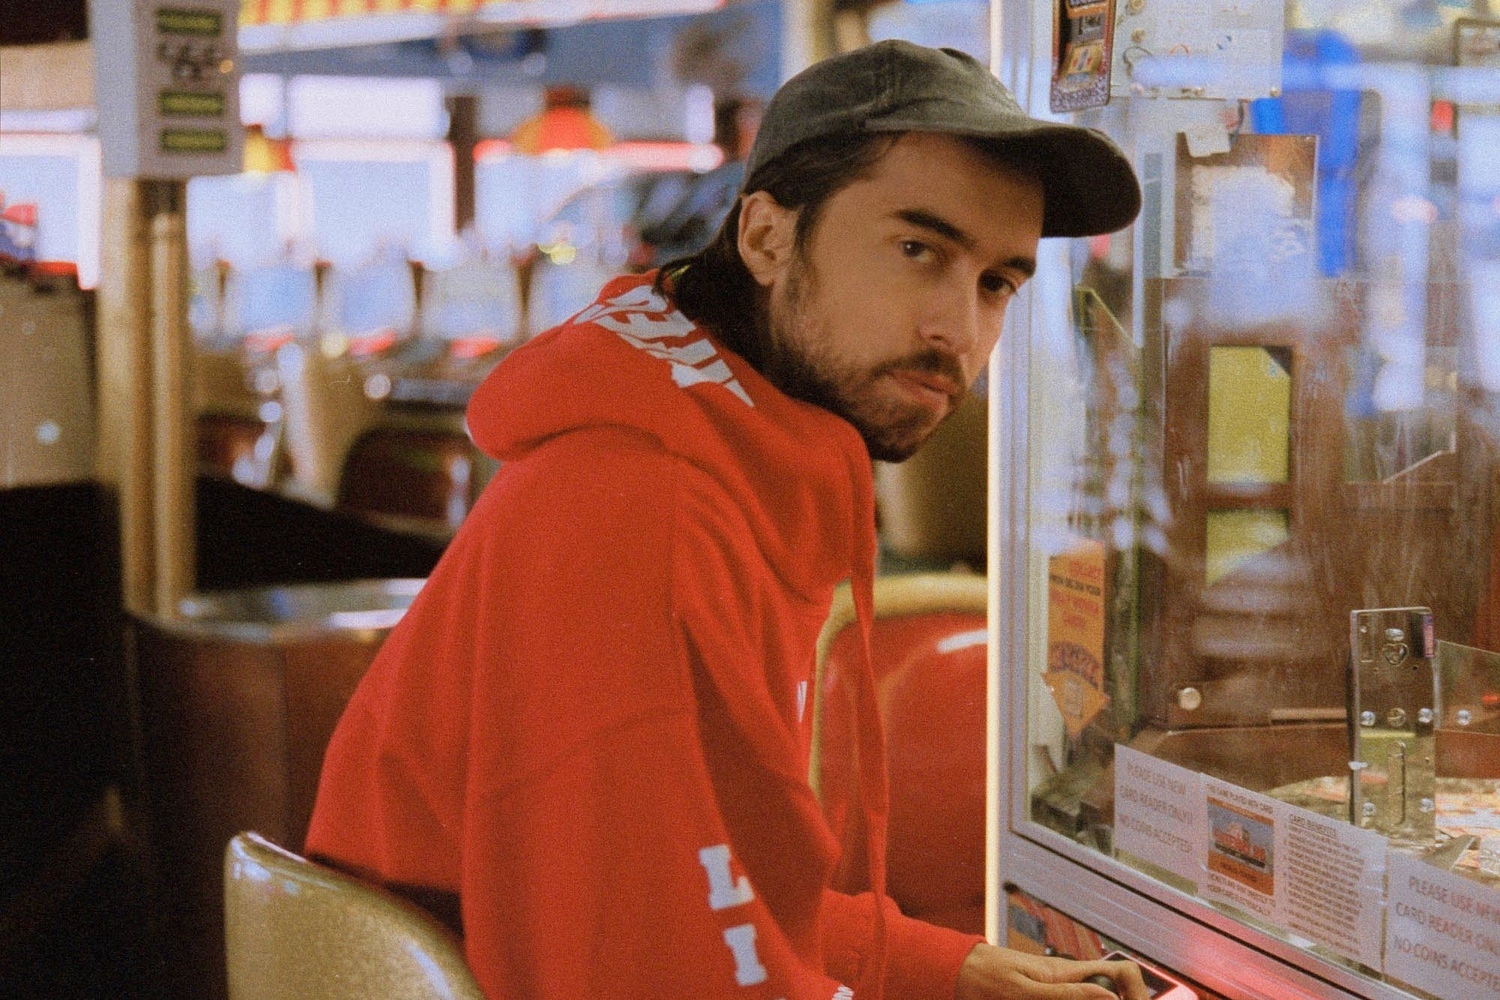 Sandy) Alex G Plots World Tour, Releases Puppet Music Video For New Song  Hope